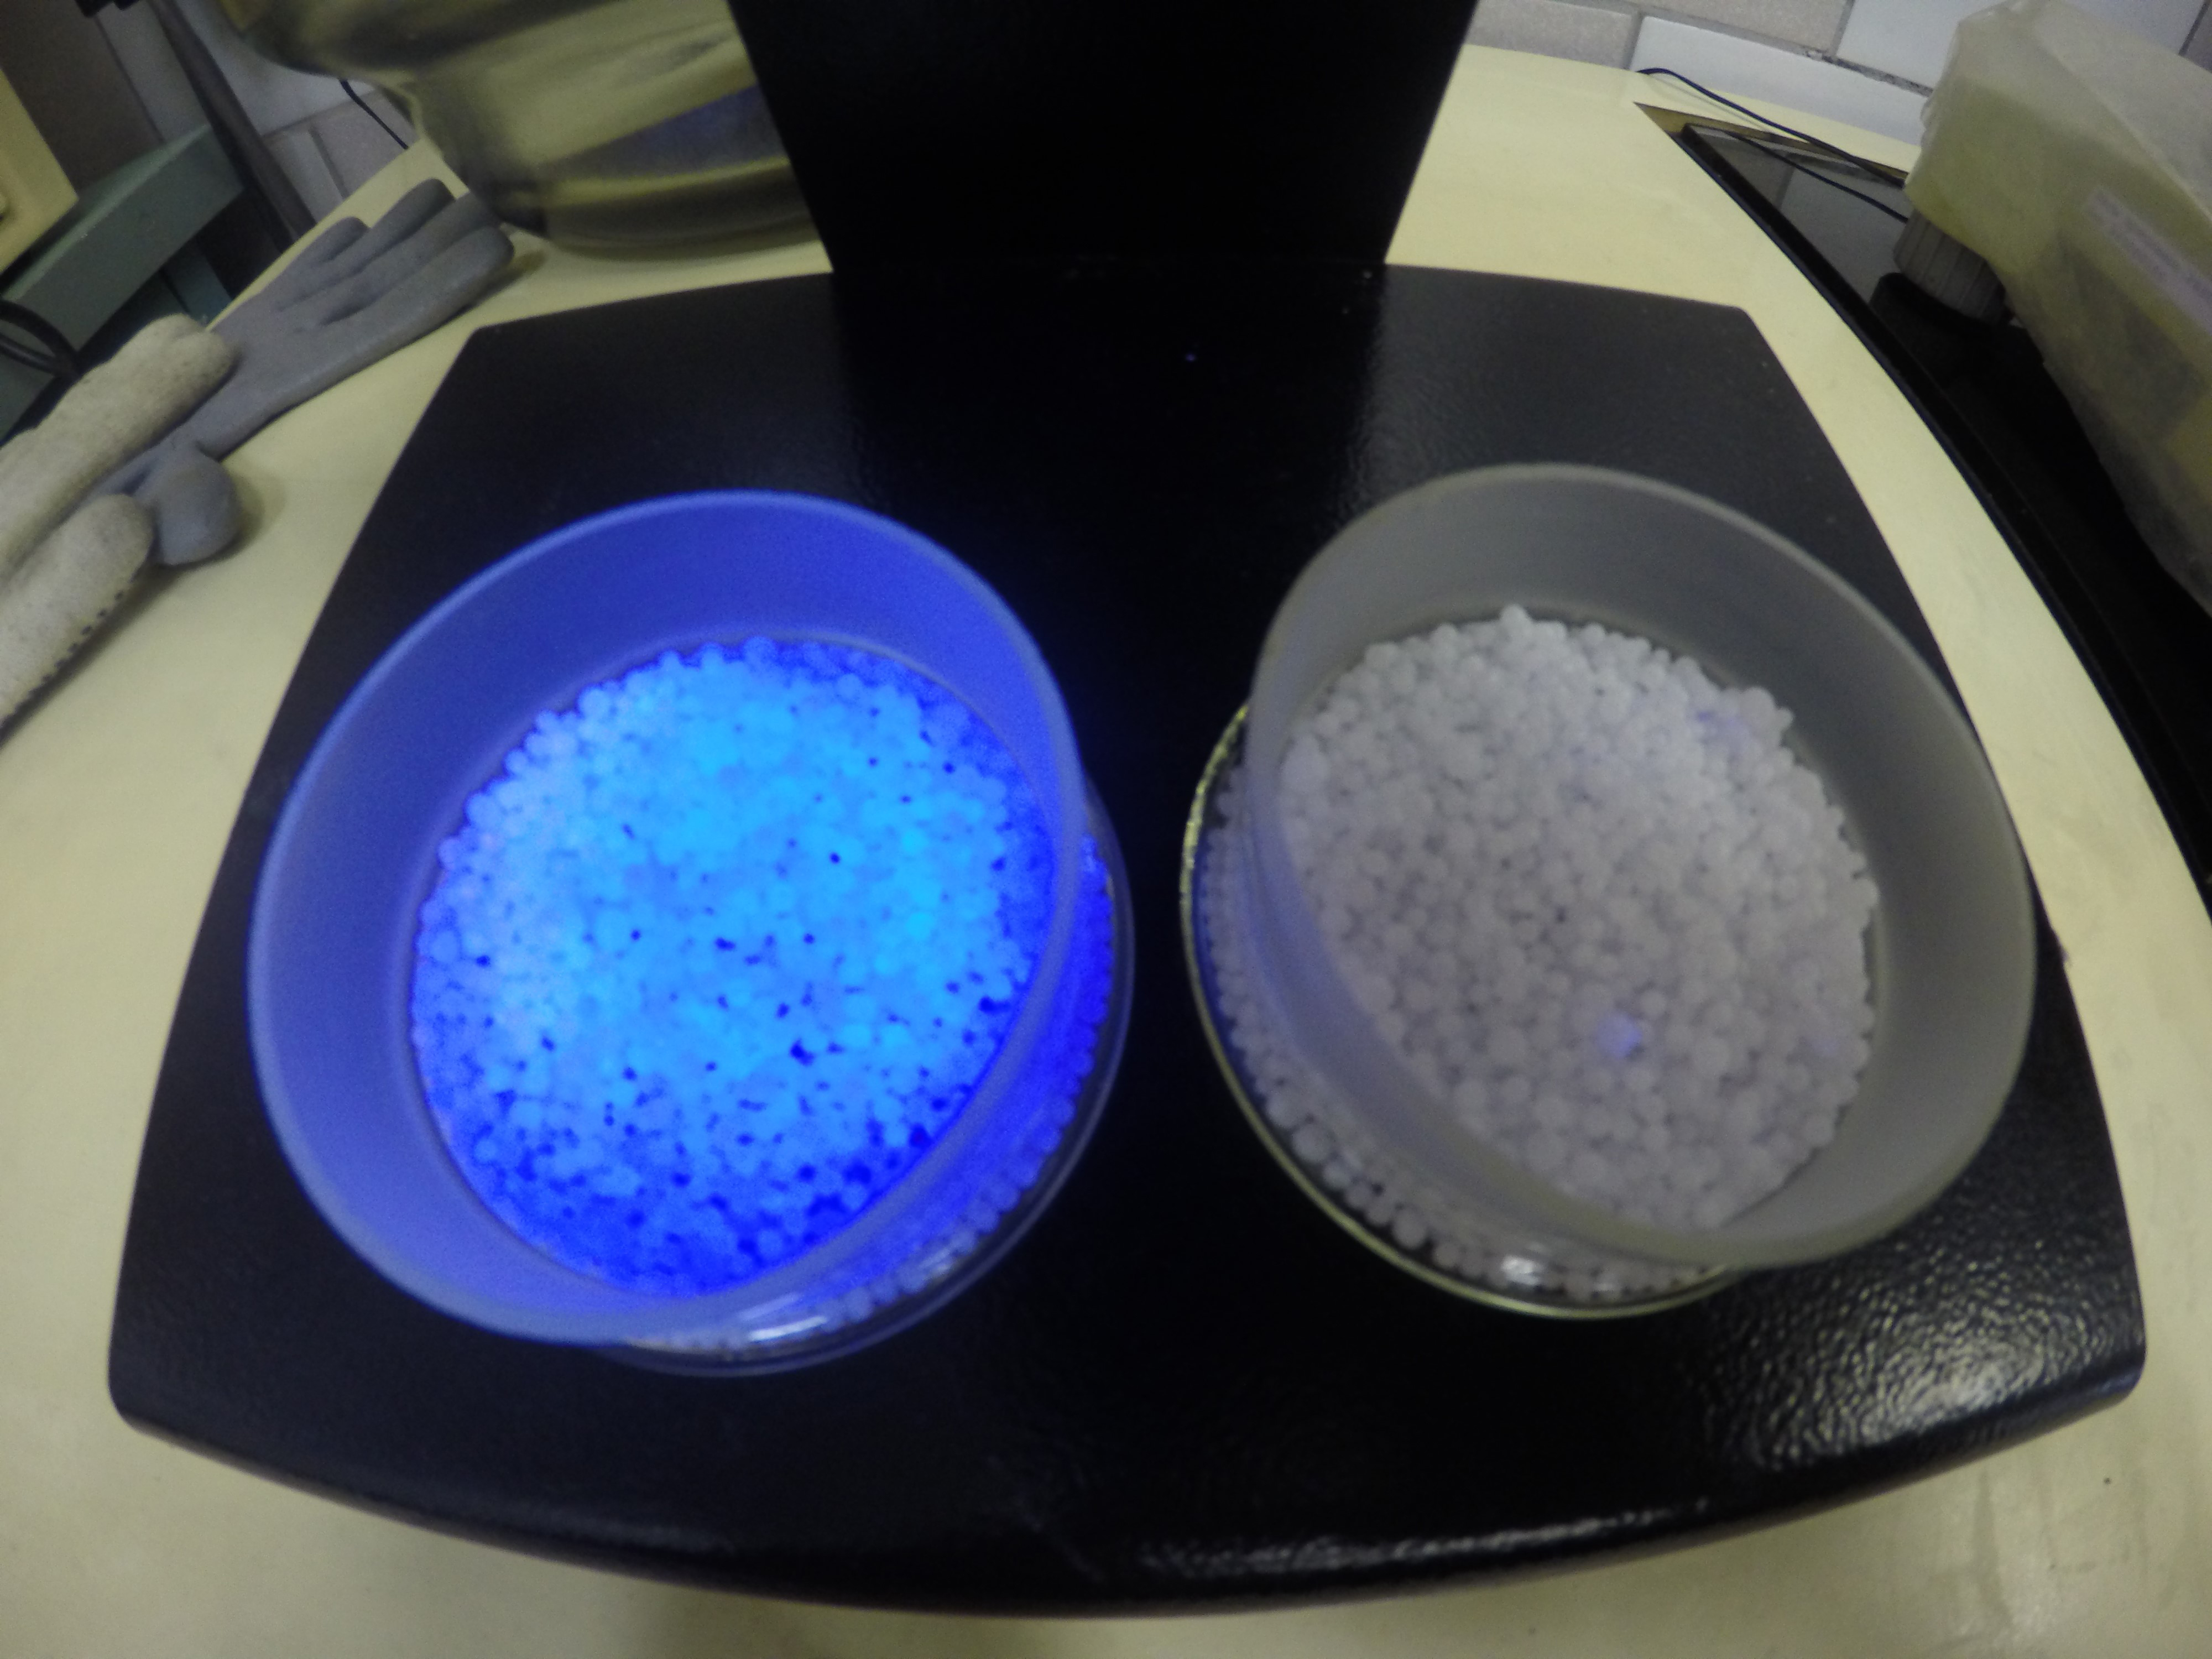 Under UV light coated prills light up blue (left) and uncoated do not (right)